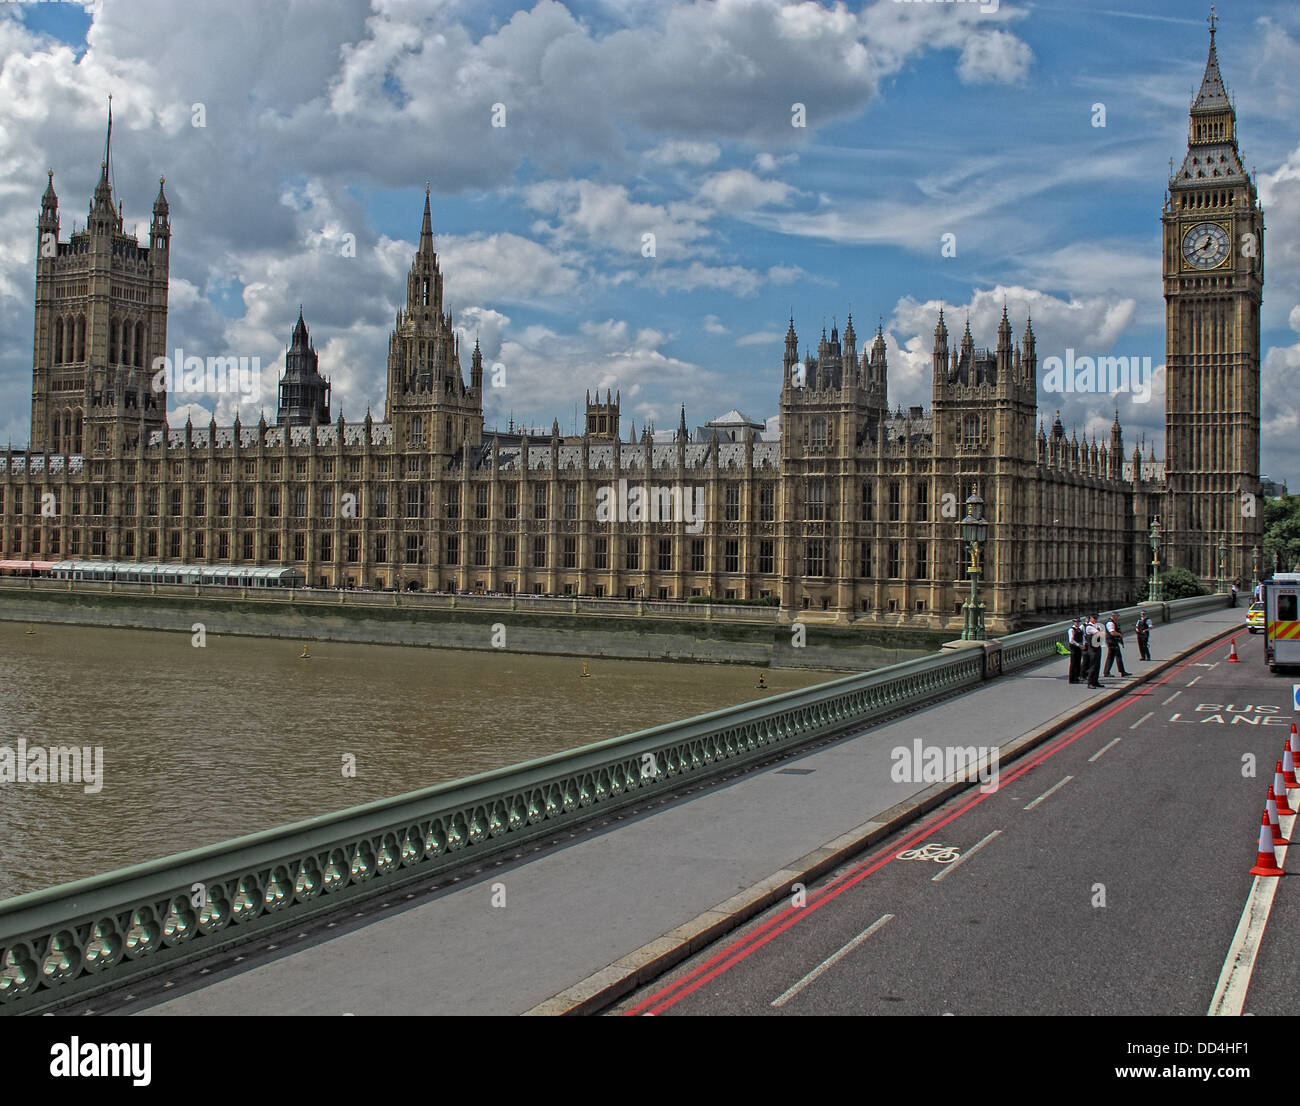 Palace of Westminster, Westminster Bridge, Norden kommend, London, South East England, SW1A 0AA Stockfoto